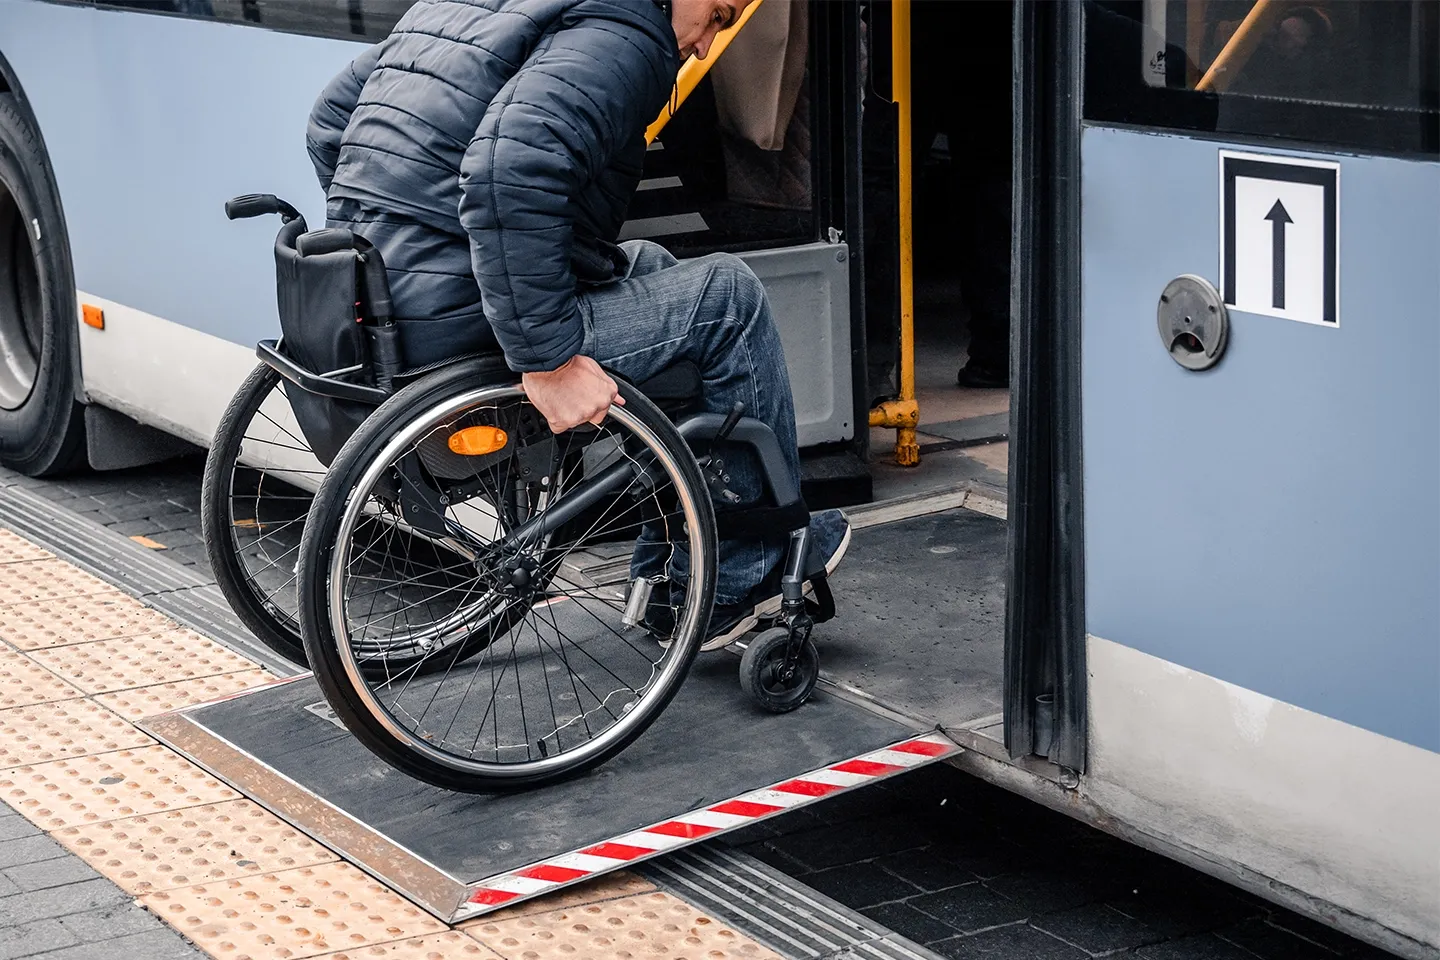 Person with a physical disability enters public transport on an accessible ramp.